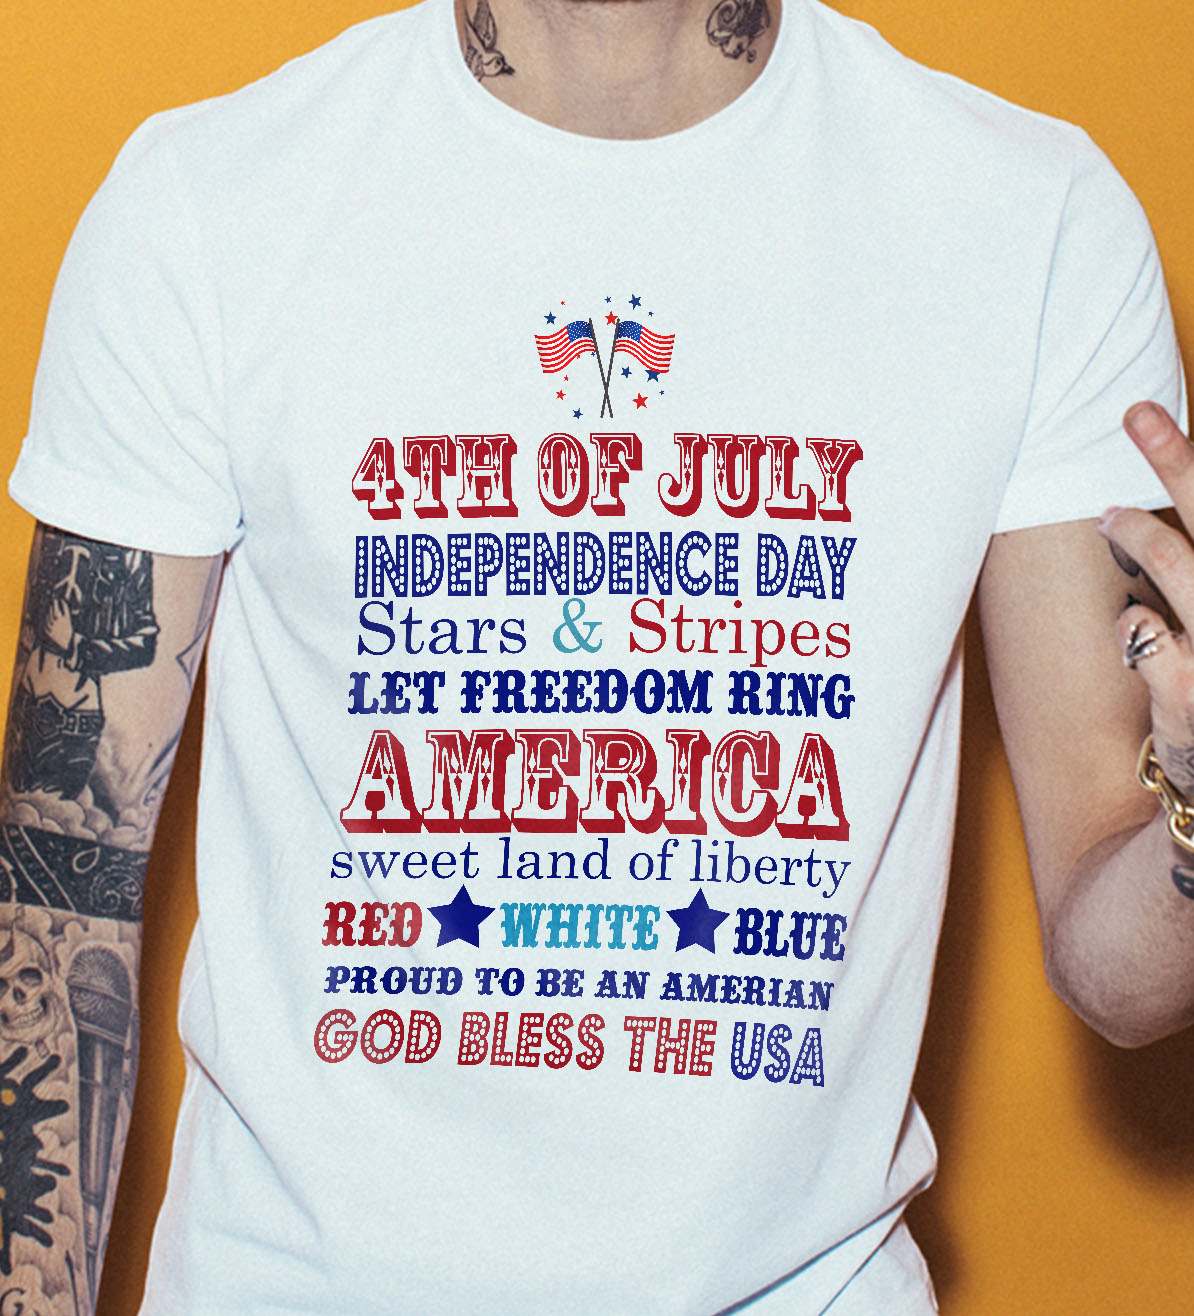 4th of July, independence day, stars and stripes - America the usa